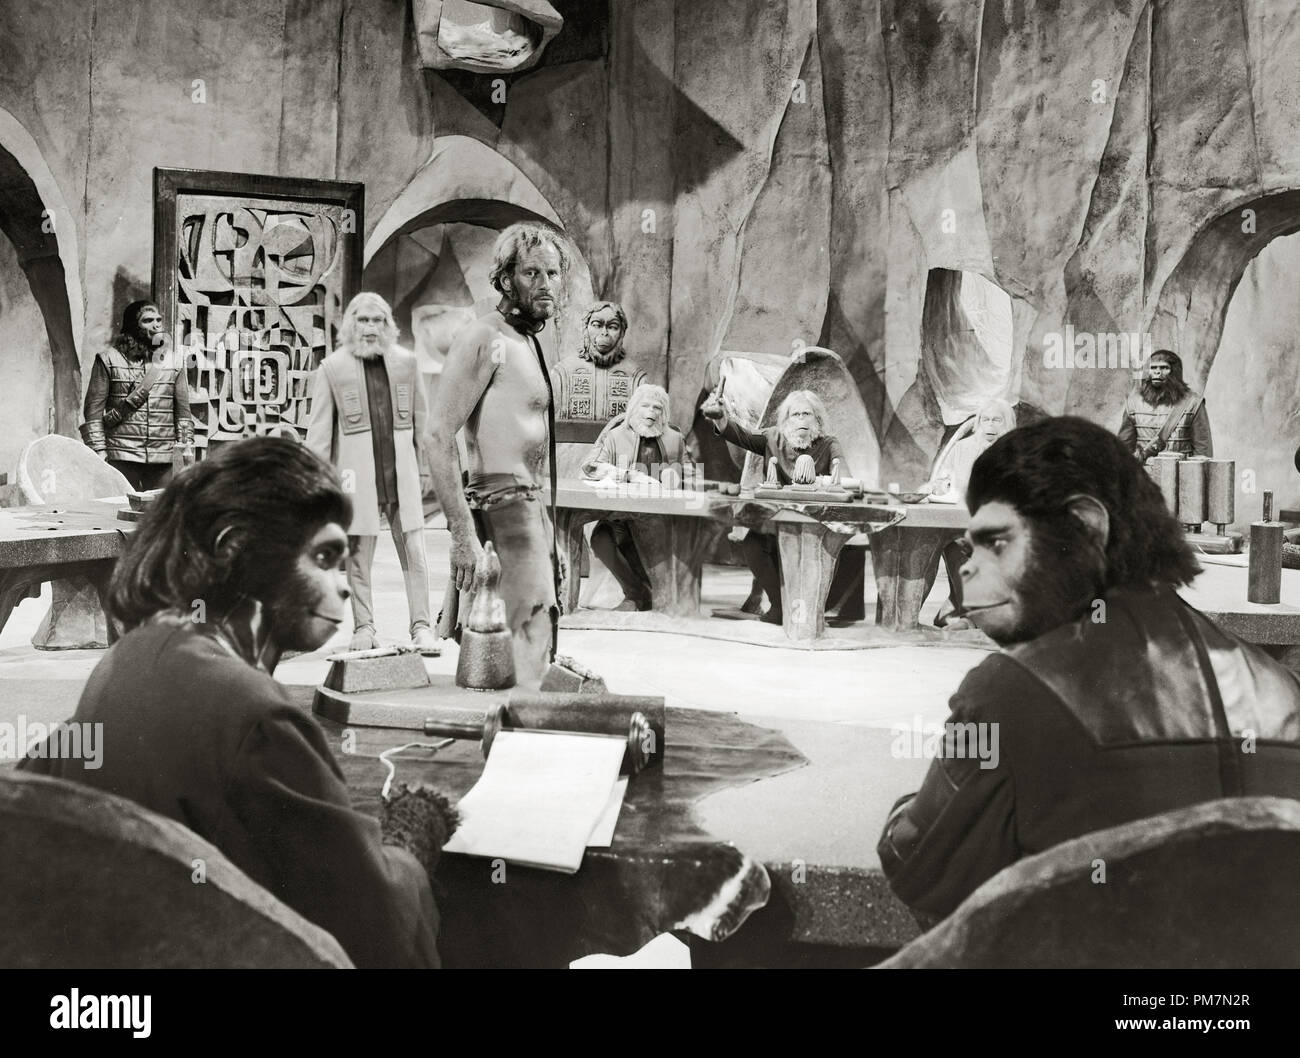 Charlton Heston, Kim Hunter and Roddy McDowall 'Planet of the Apes' 1968 20th Century Fox File Reference # 31202 643THA Stock Photo